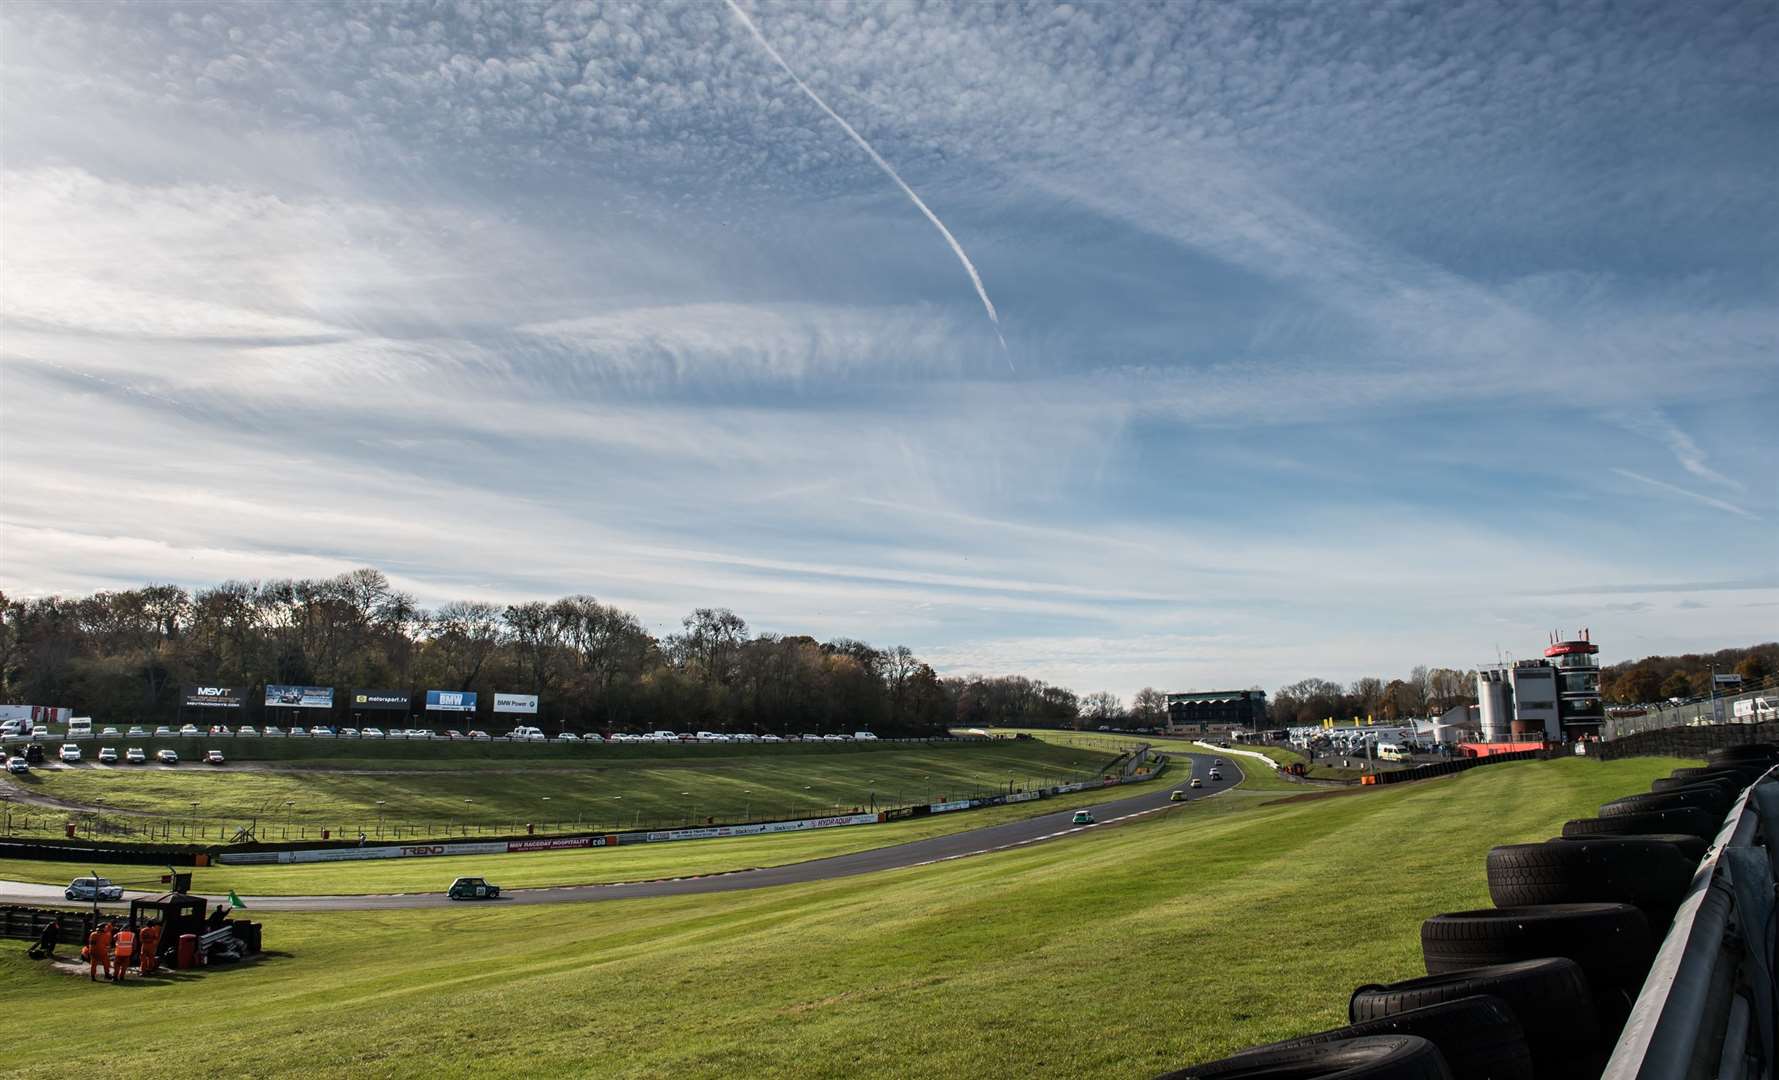 Brands Hatch began life in 1926 when grasstrack racing took place on an anti-clockwise layout, with motorcyclists using the natural bowl. In 1950, the track was surfaced with tarmac. Picture: Stuart Adams